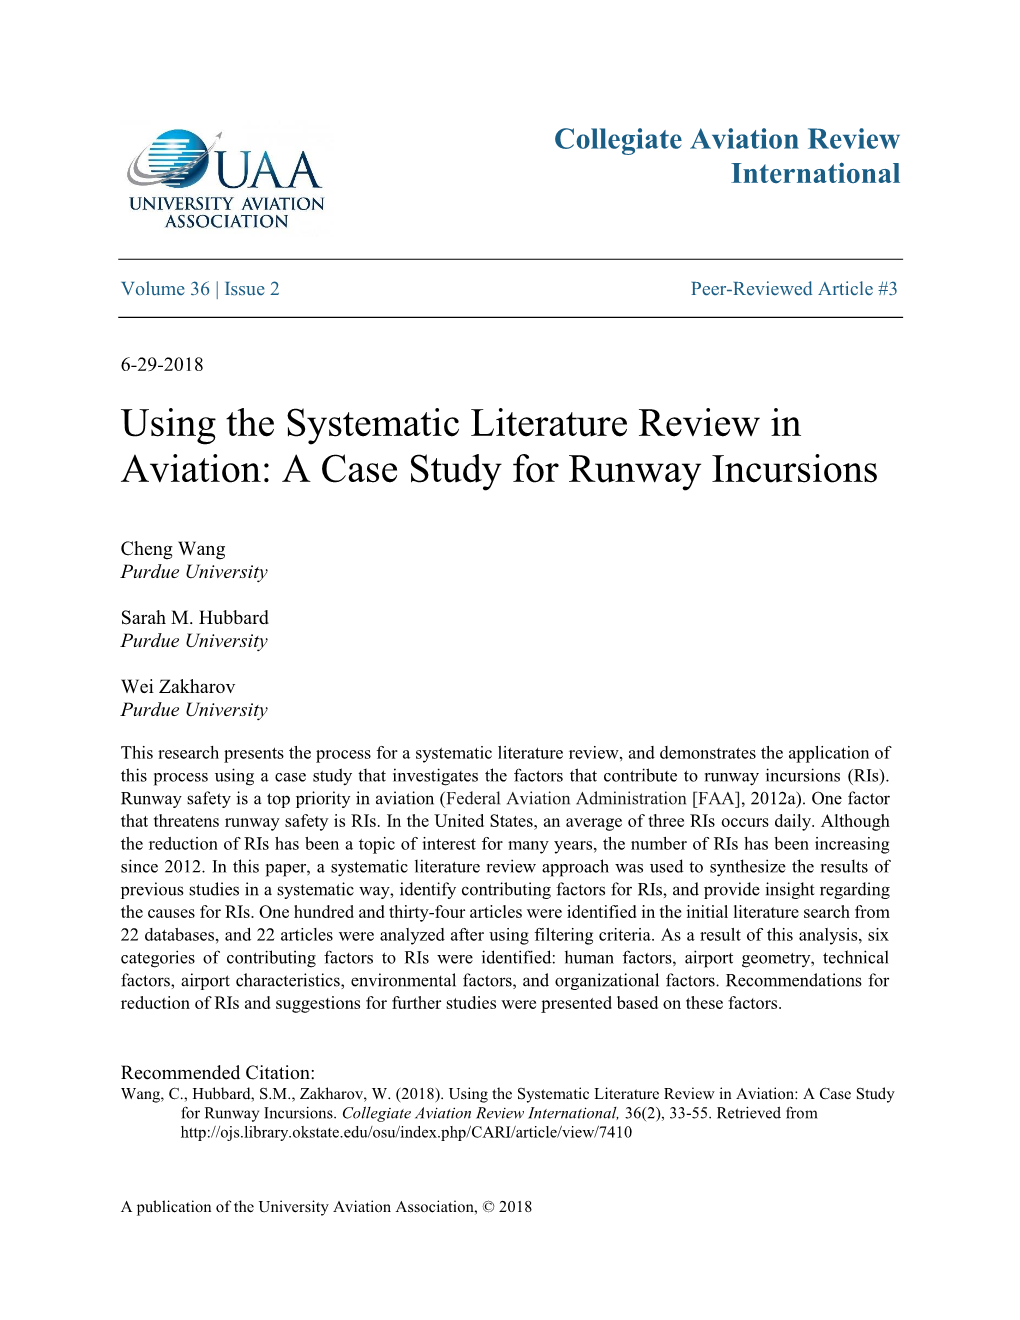 A Case Study for Runway Incursions